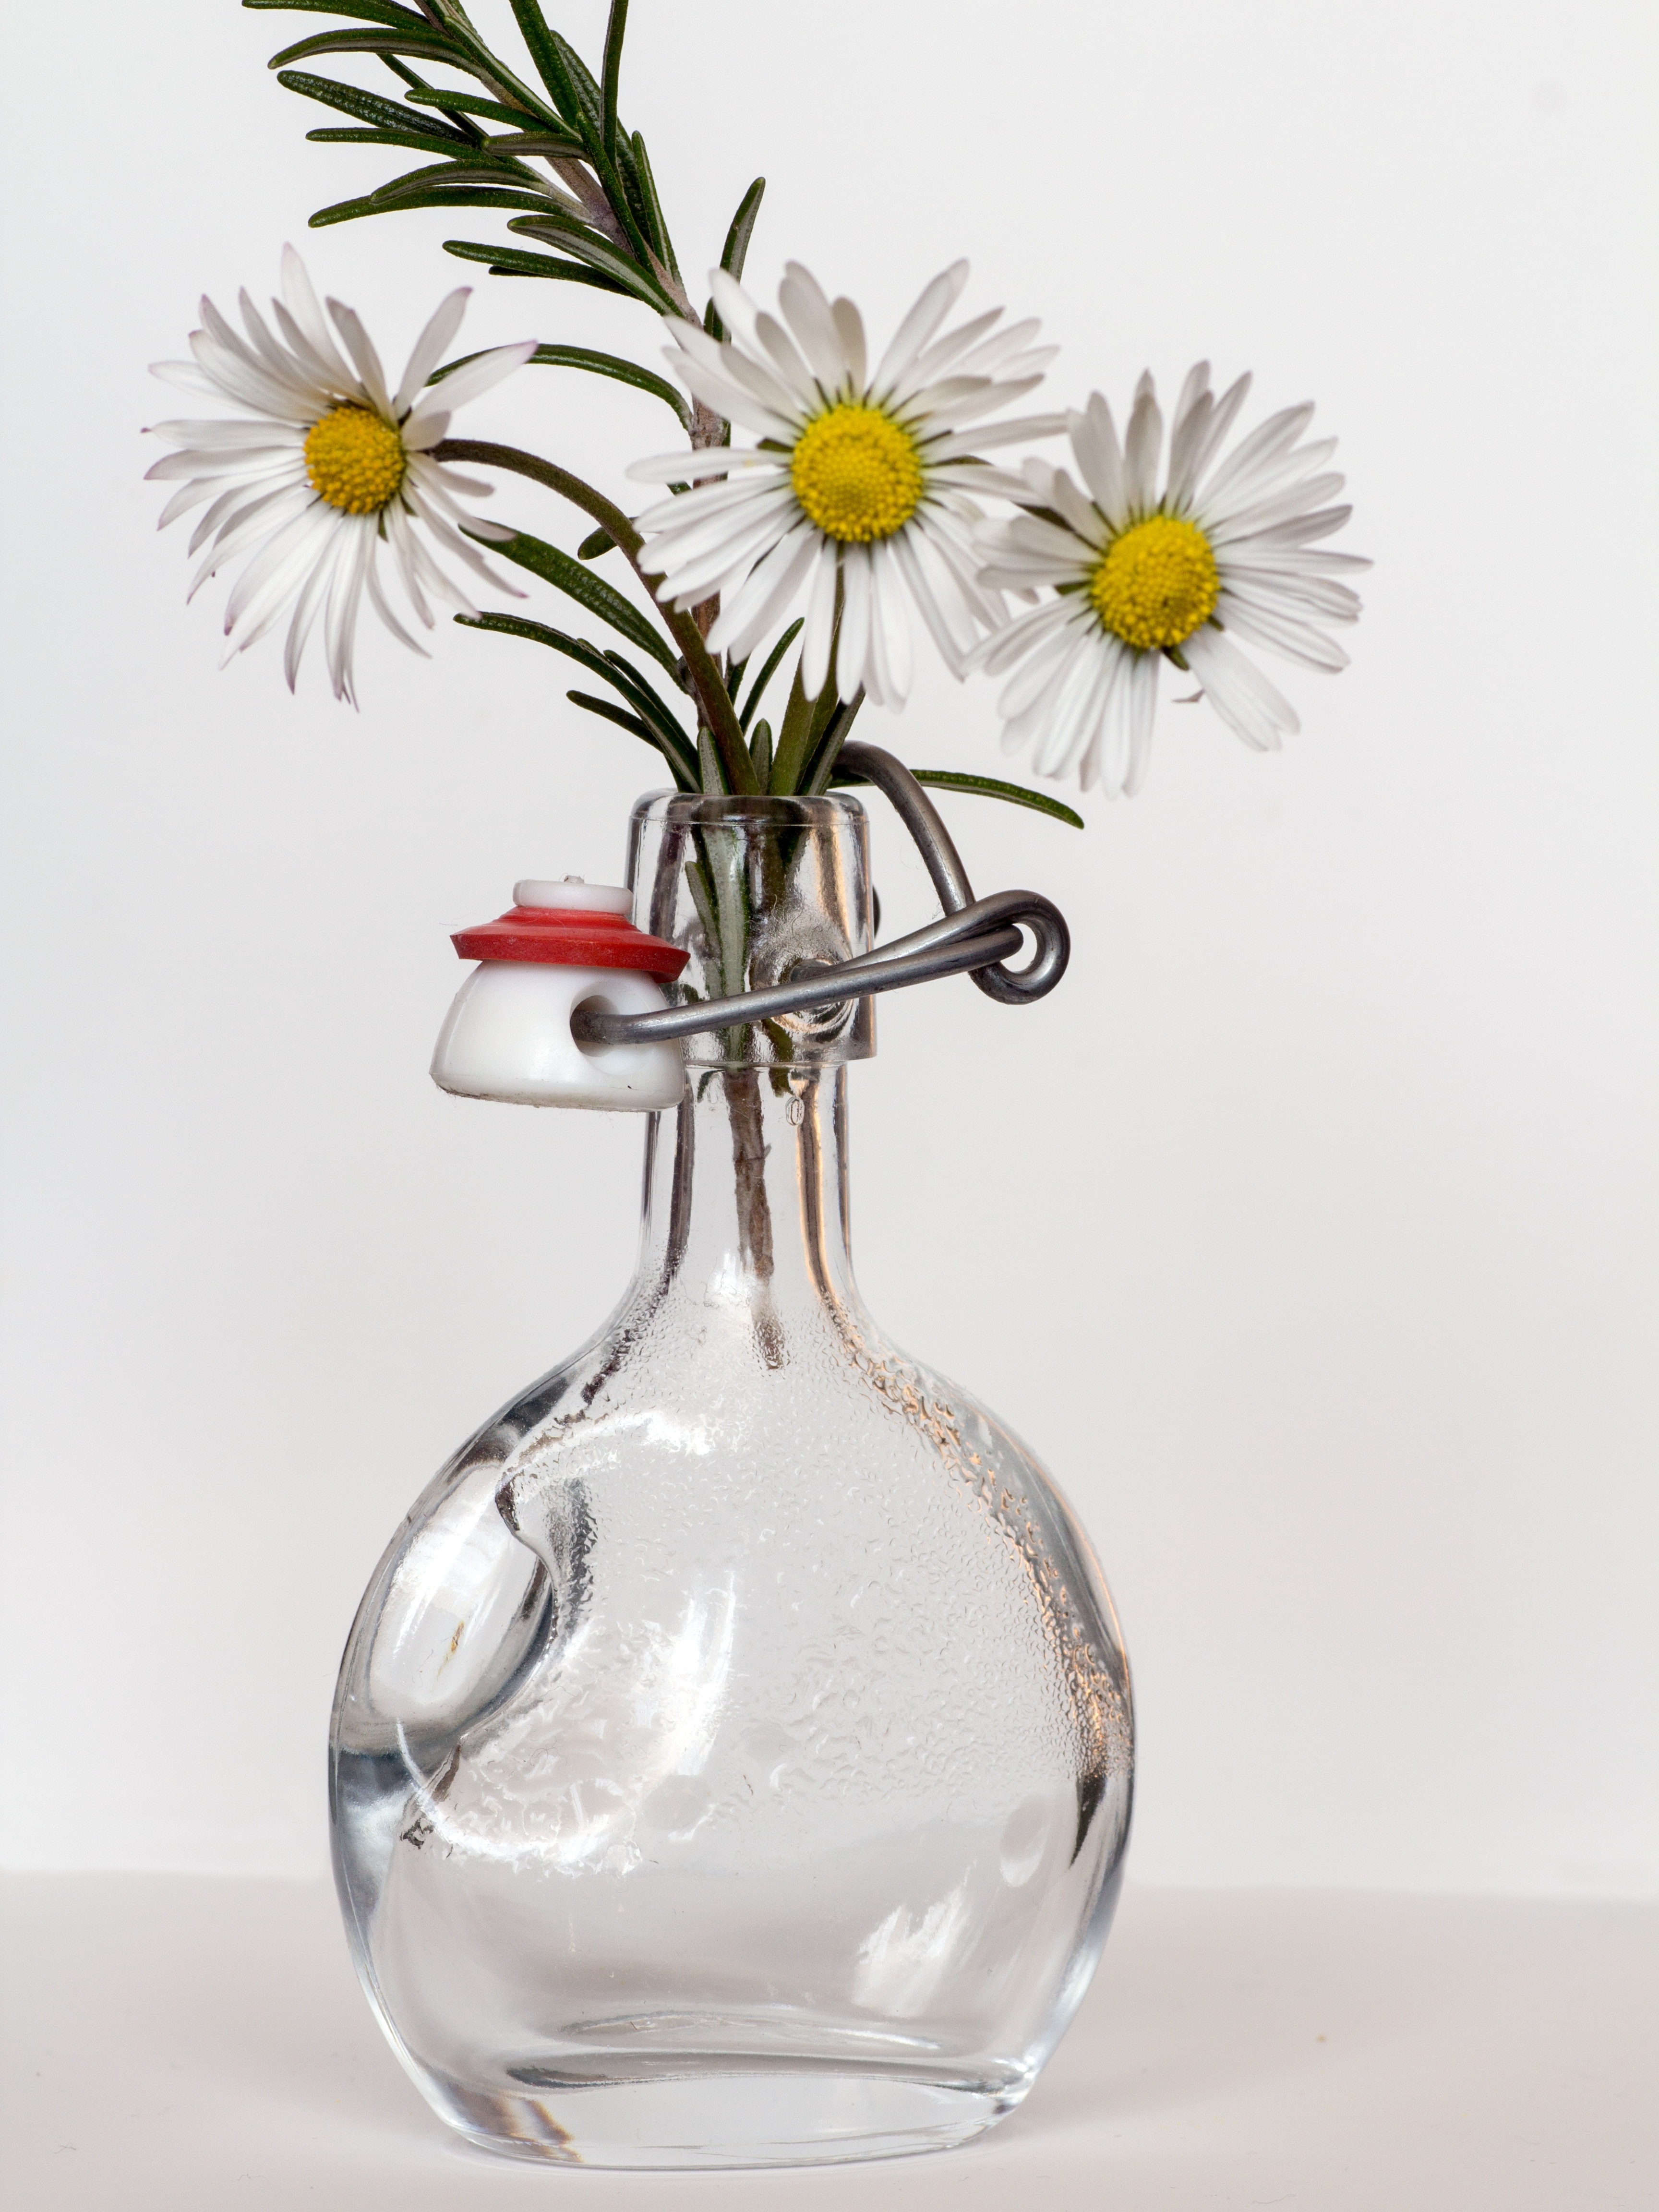 white daisies in clear glass vase